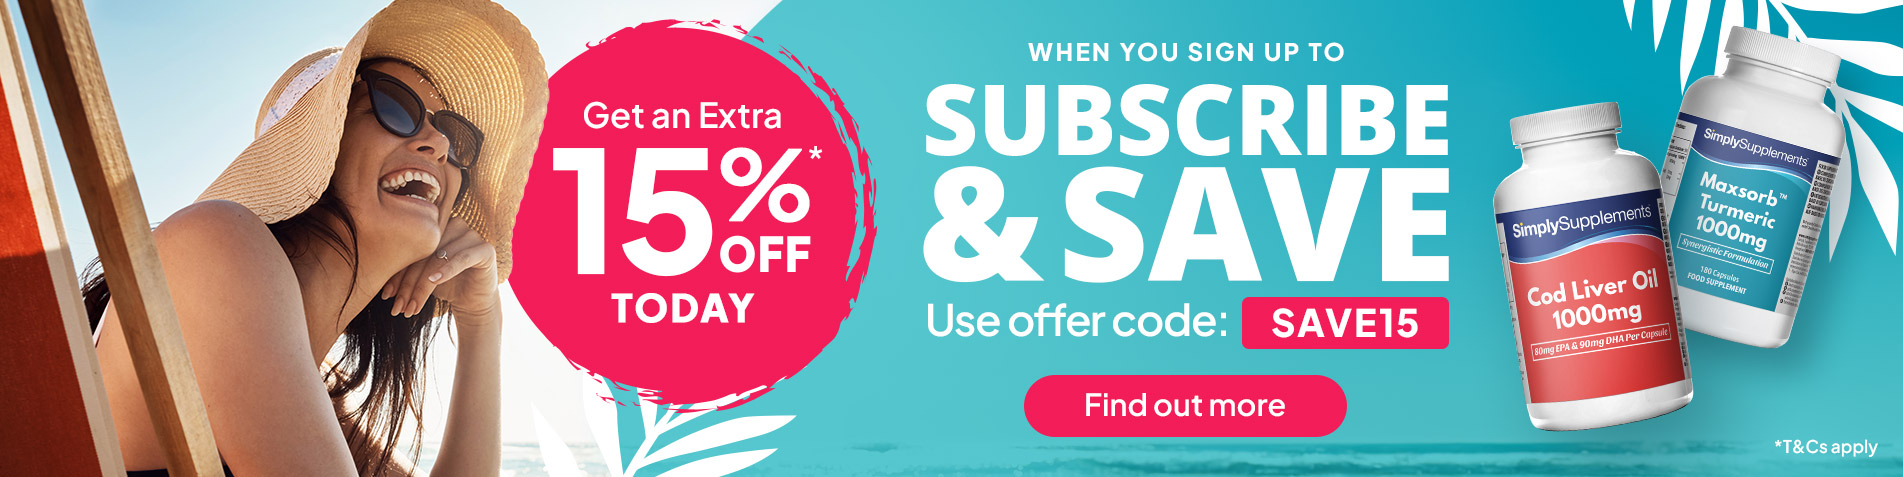 Get an extra 15% off today when you sign up to Subscribe & Save. Use offer code: SAVE15